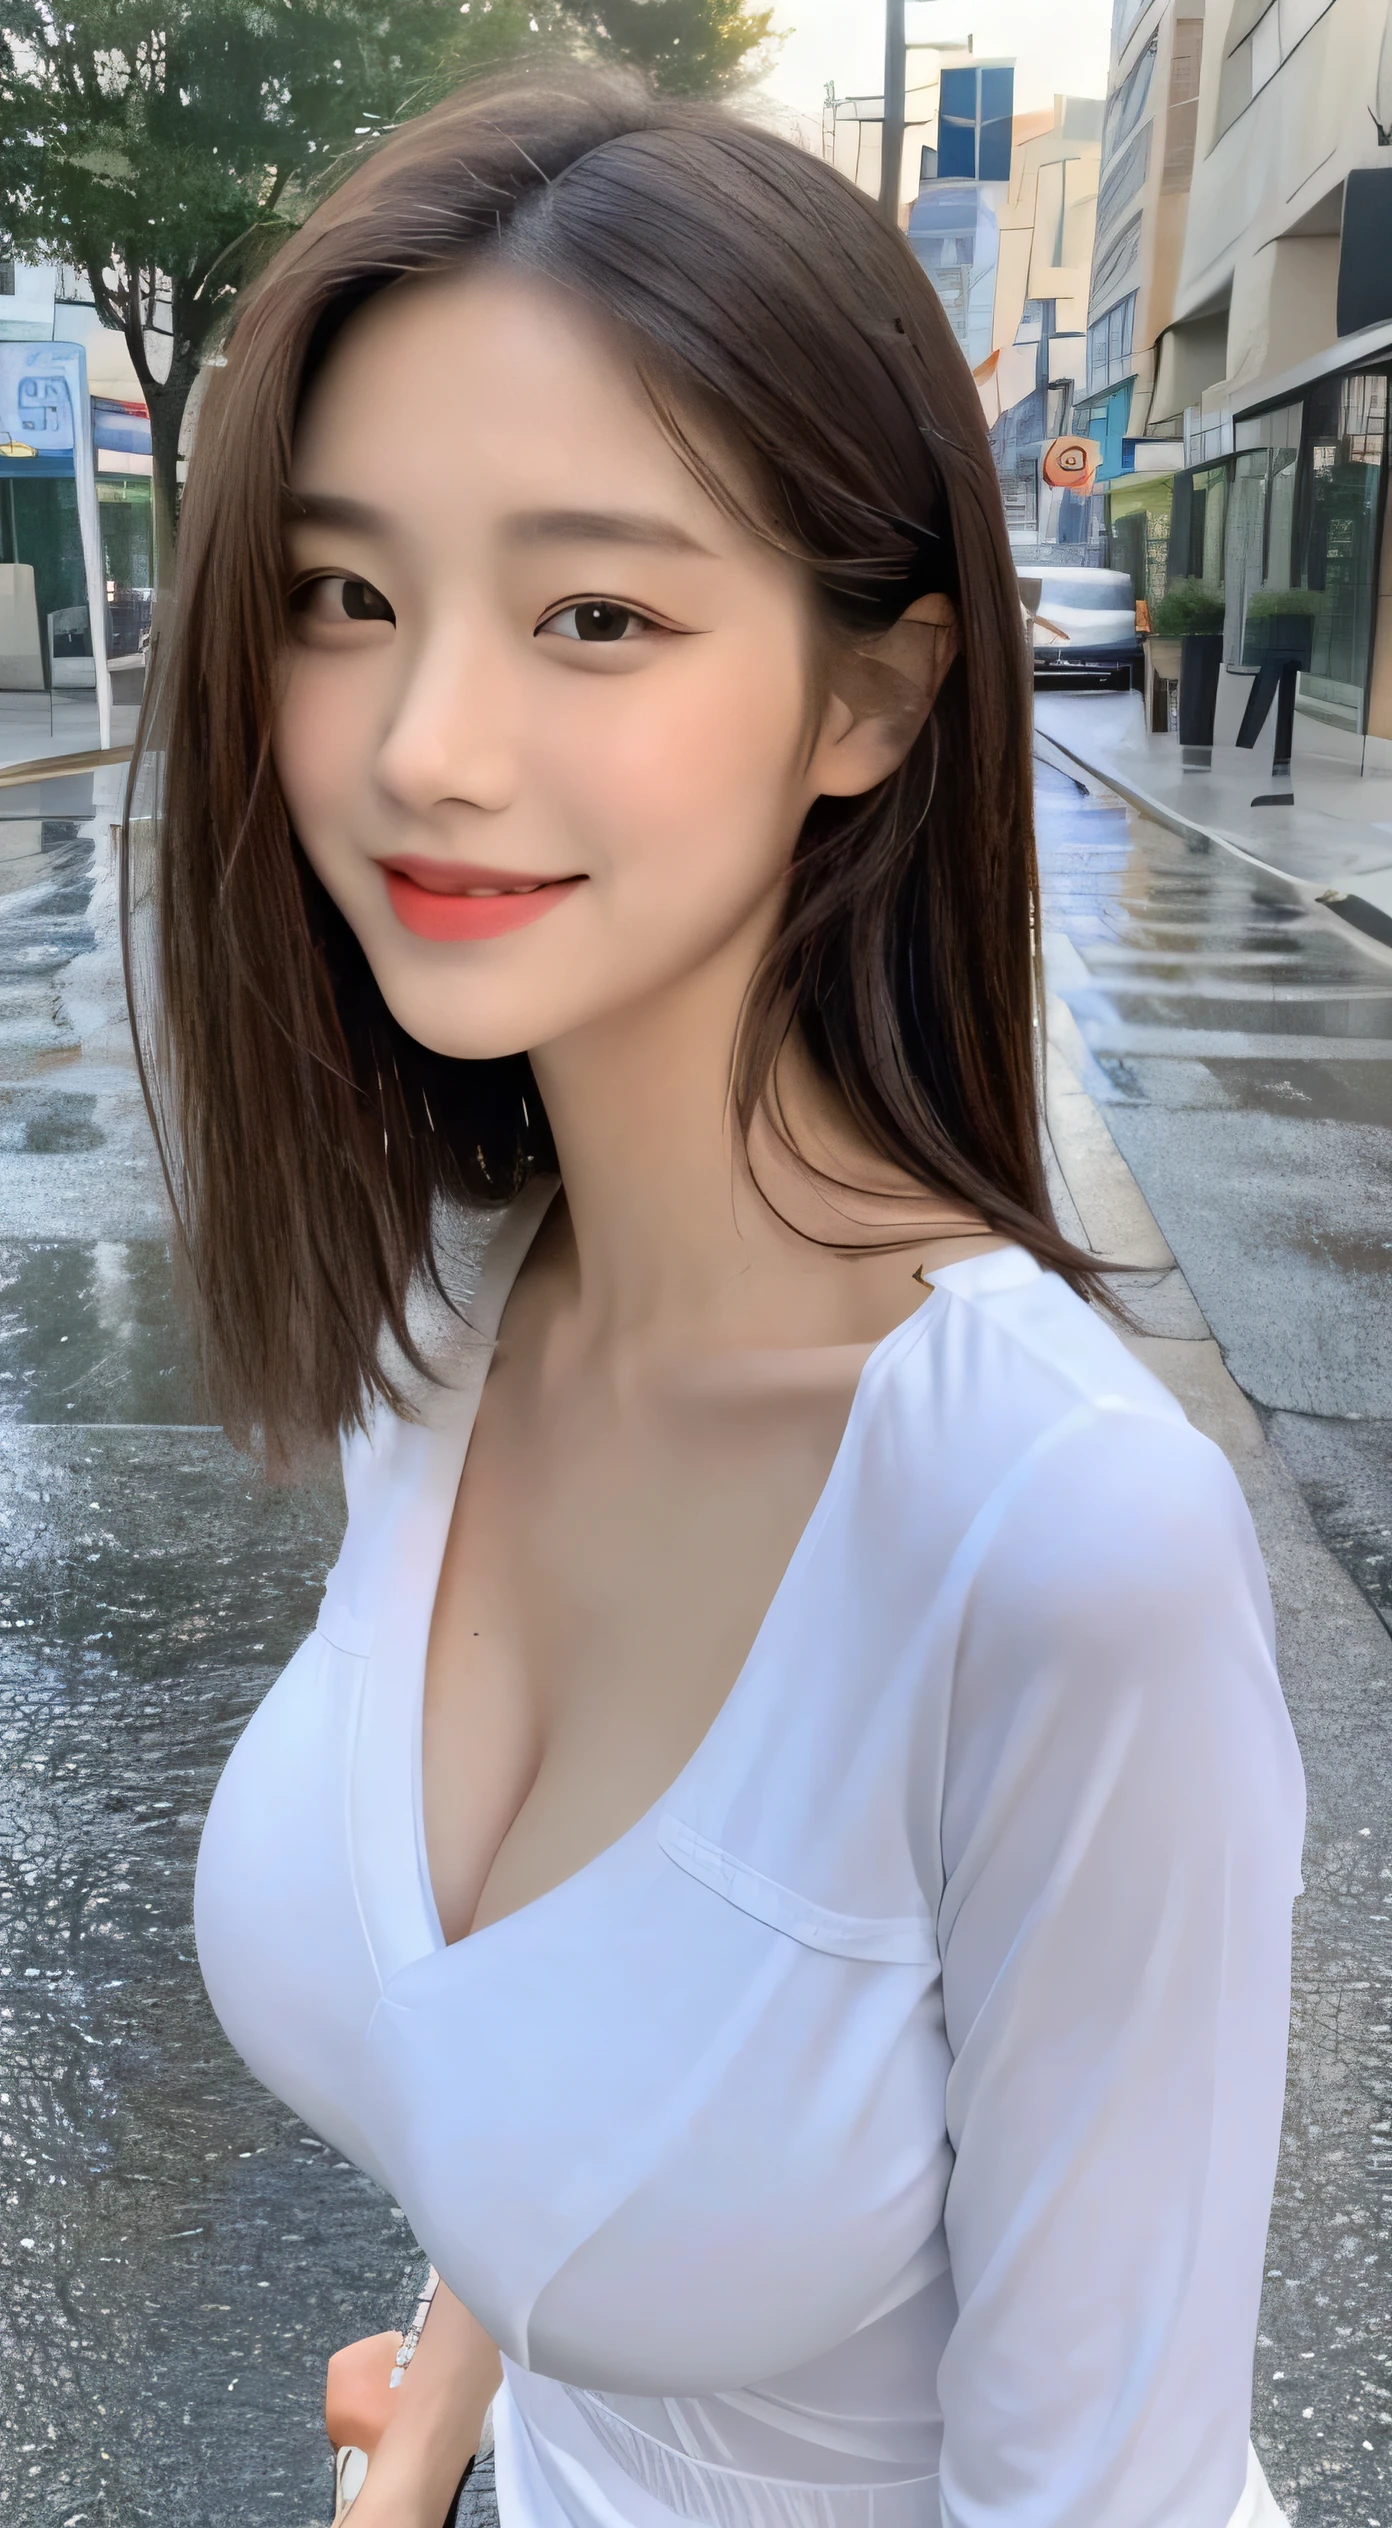 ((best quality, 8K, masterpiece:1.3)), focus: 1.2, perfect body beautiful: 1.4, buttocks: 1.2, ((layered hairstyle, breast: 1.2)), (wet clothes: 1.1), (rain, street:1.3), tube top dress: 1.1, Highly detailed facial and skin textures, narrow eyes, double eyelids, whiten skin, long hair, (shut up: 1.3), Smile